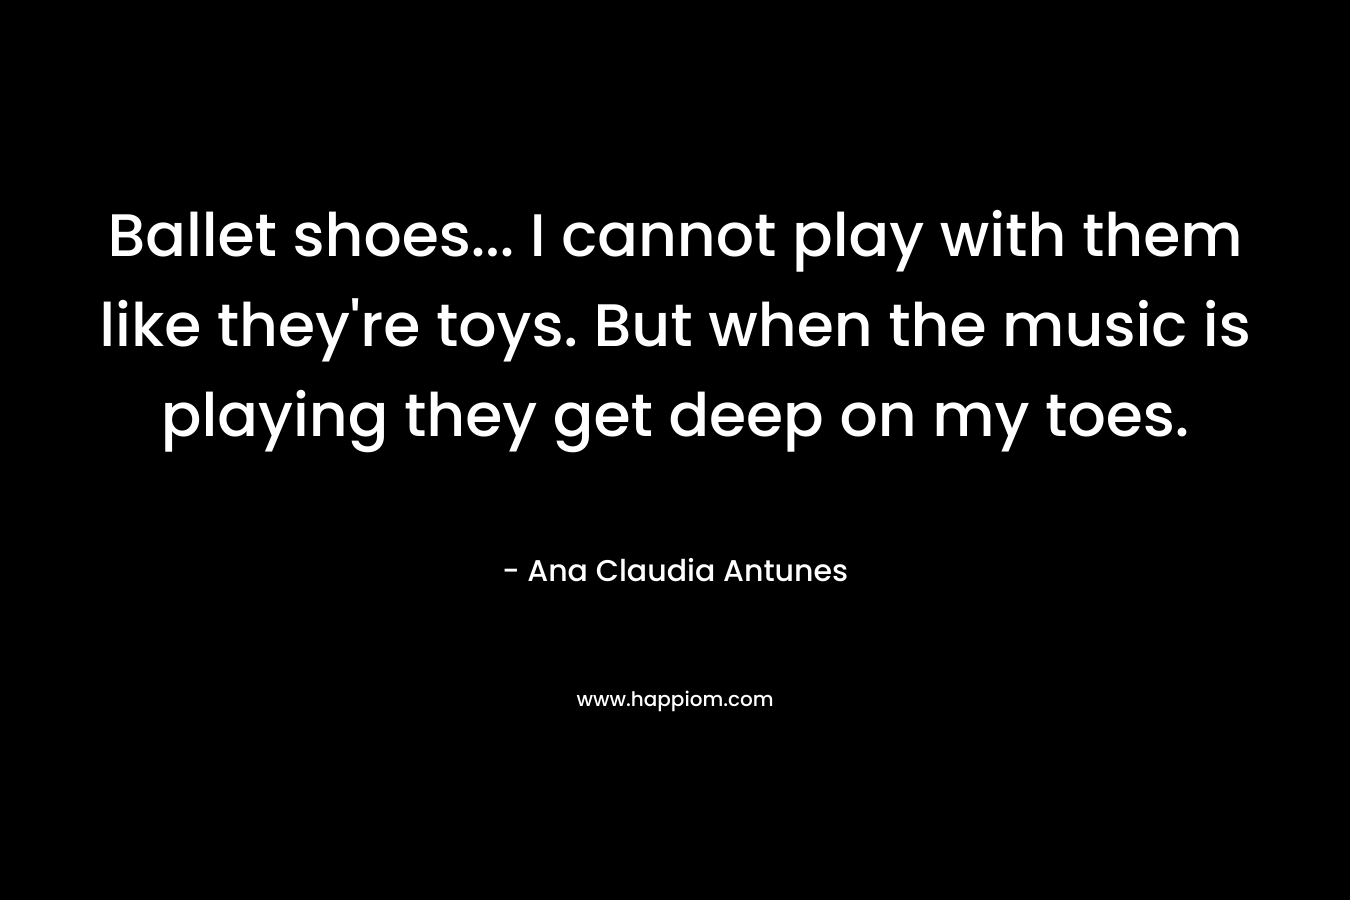 Ballet shoes… I cannot play with them like they’re toys. But when the music is playing they get deep on my toes. – Ana Claudia Antunes